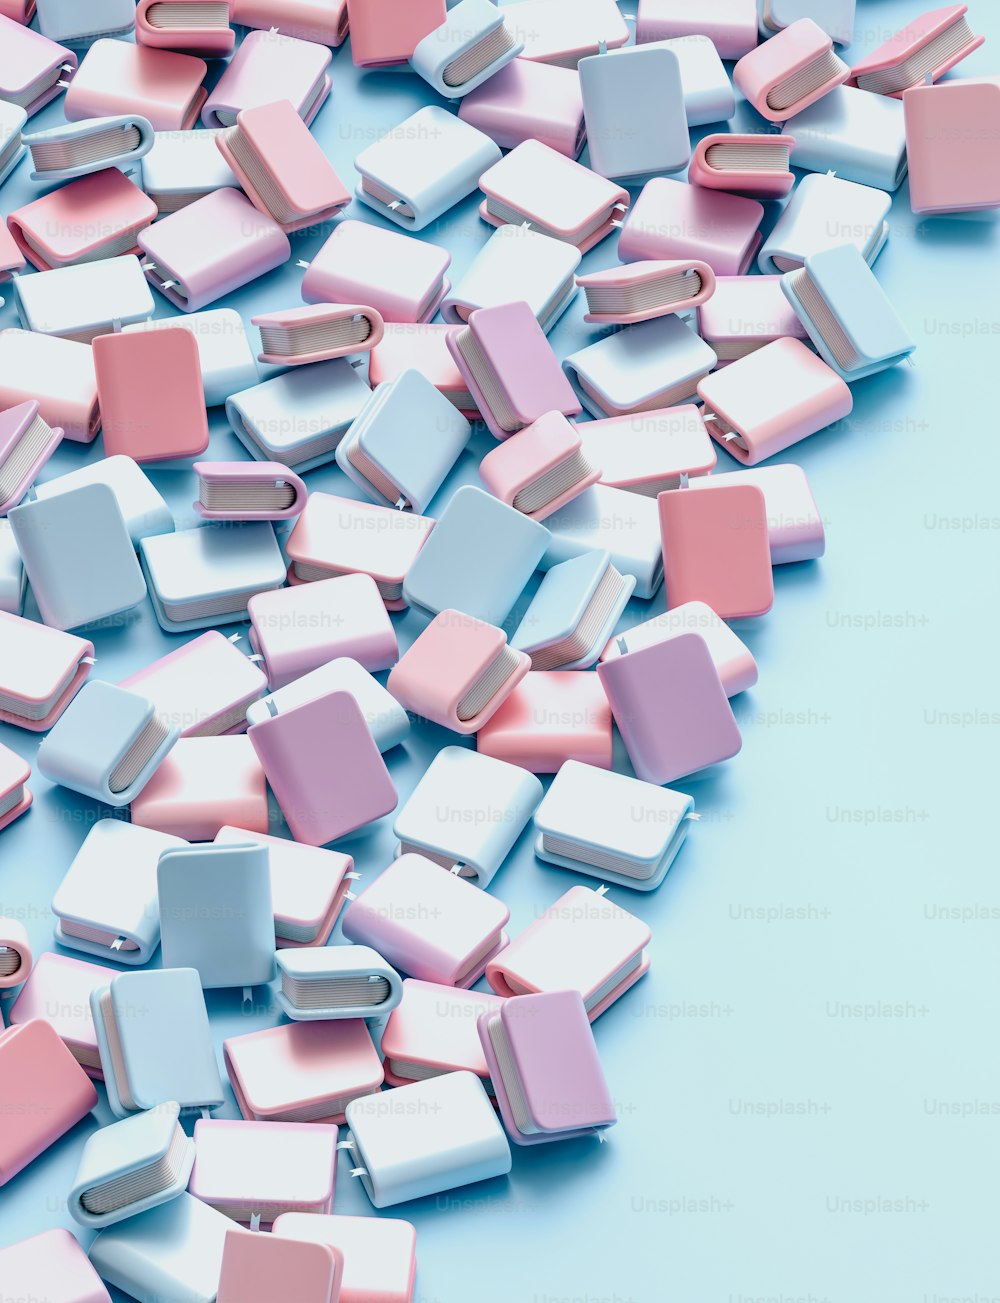 a pile of pink and white square objects on a blue background